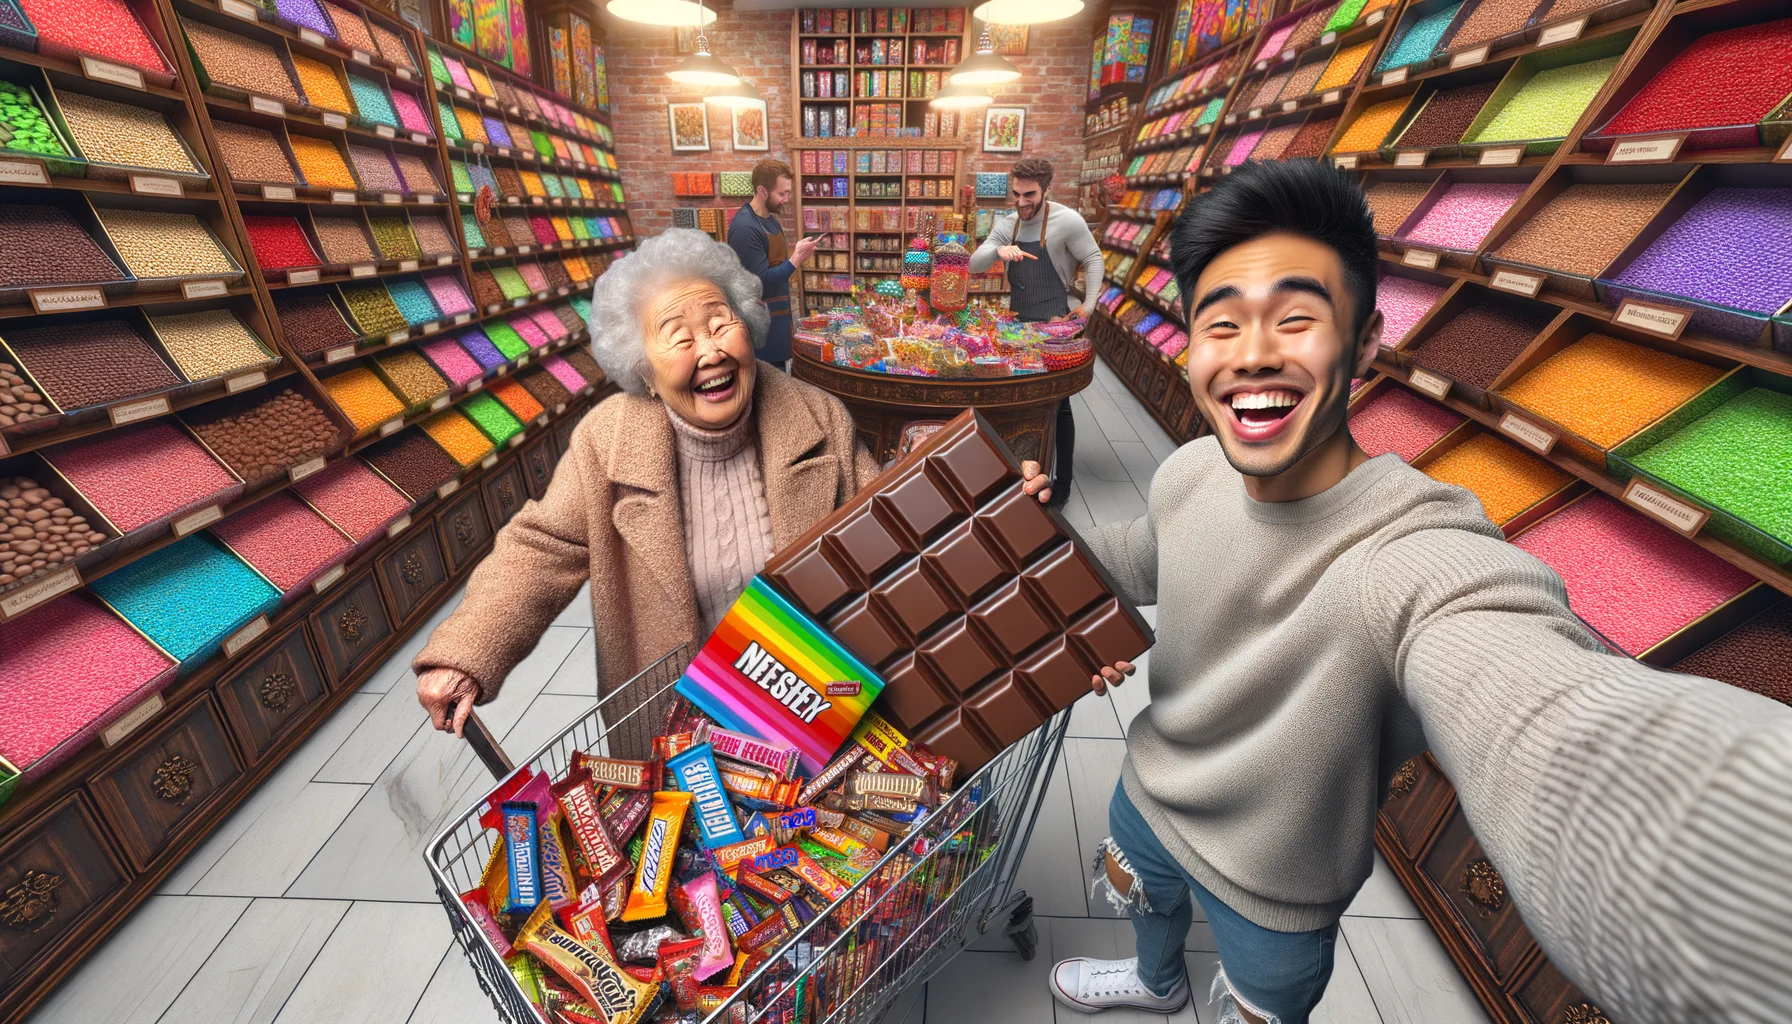 Picture an ideal and amusing scenario for gourmet candy bar shopping. The setting is a brightly-lit, high-end candy store filled with rainbow shelves stacked high with a plethora of tasty and vibrantly colored gourmet candy bars. Among the shoppers, an elderly Asian woman is chuckling as she navigates a cart full of assorted candy with a joyous expression. A Hispanic young man stands in the corner, posing for a selfie while grinning and holding a ridiculously oversized gourmet chocolate bar. The staff, an outgoing black barista cheerfully offers candy samples to the eager customers. The joyful and surreal atmosphere of the place adds a humorous touch to the whole scene.